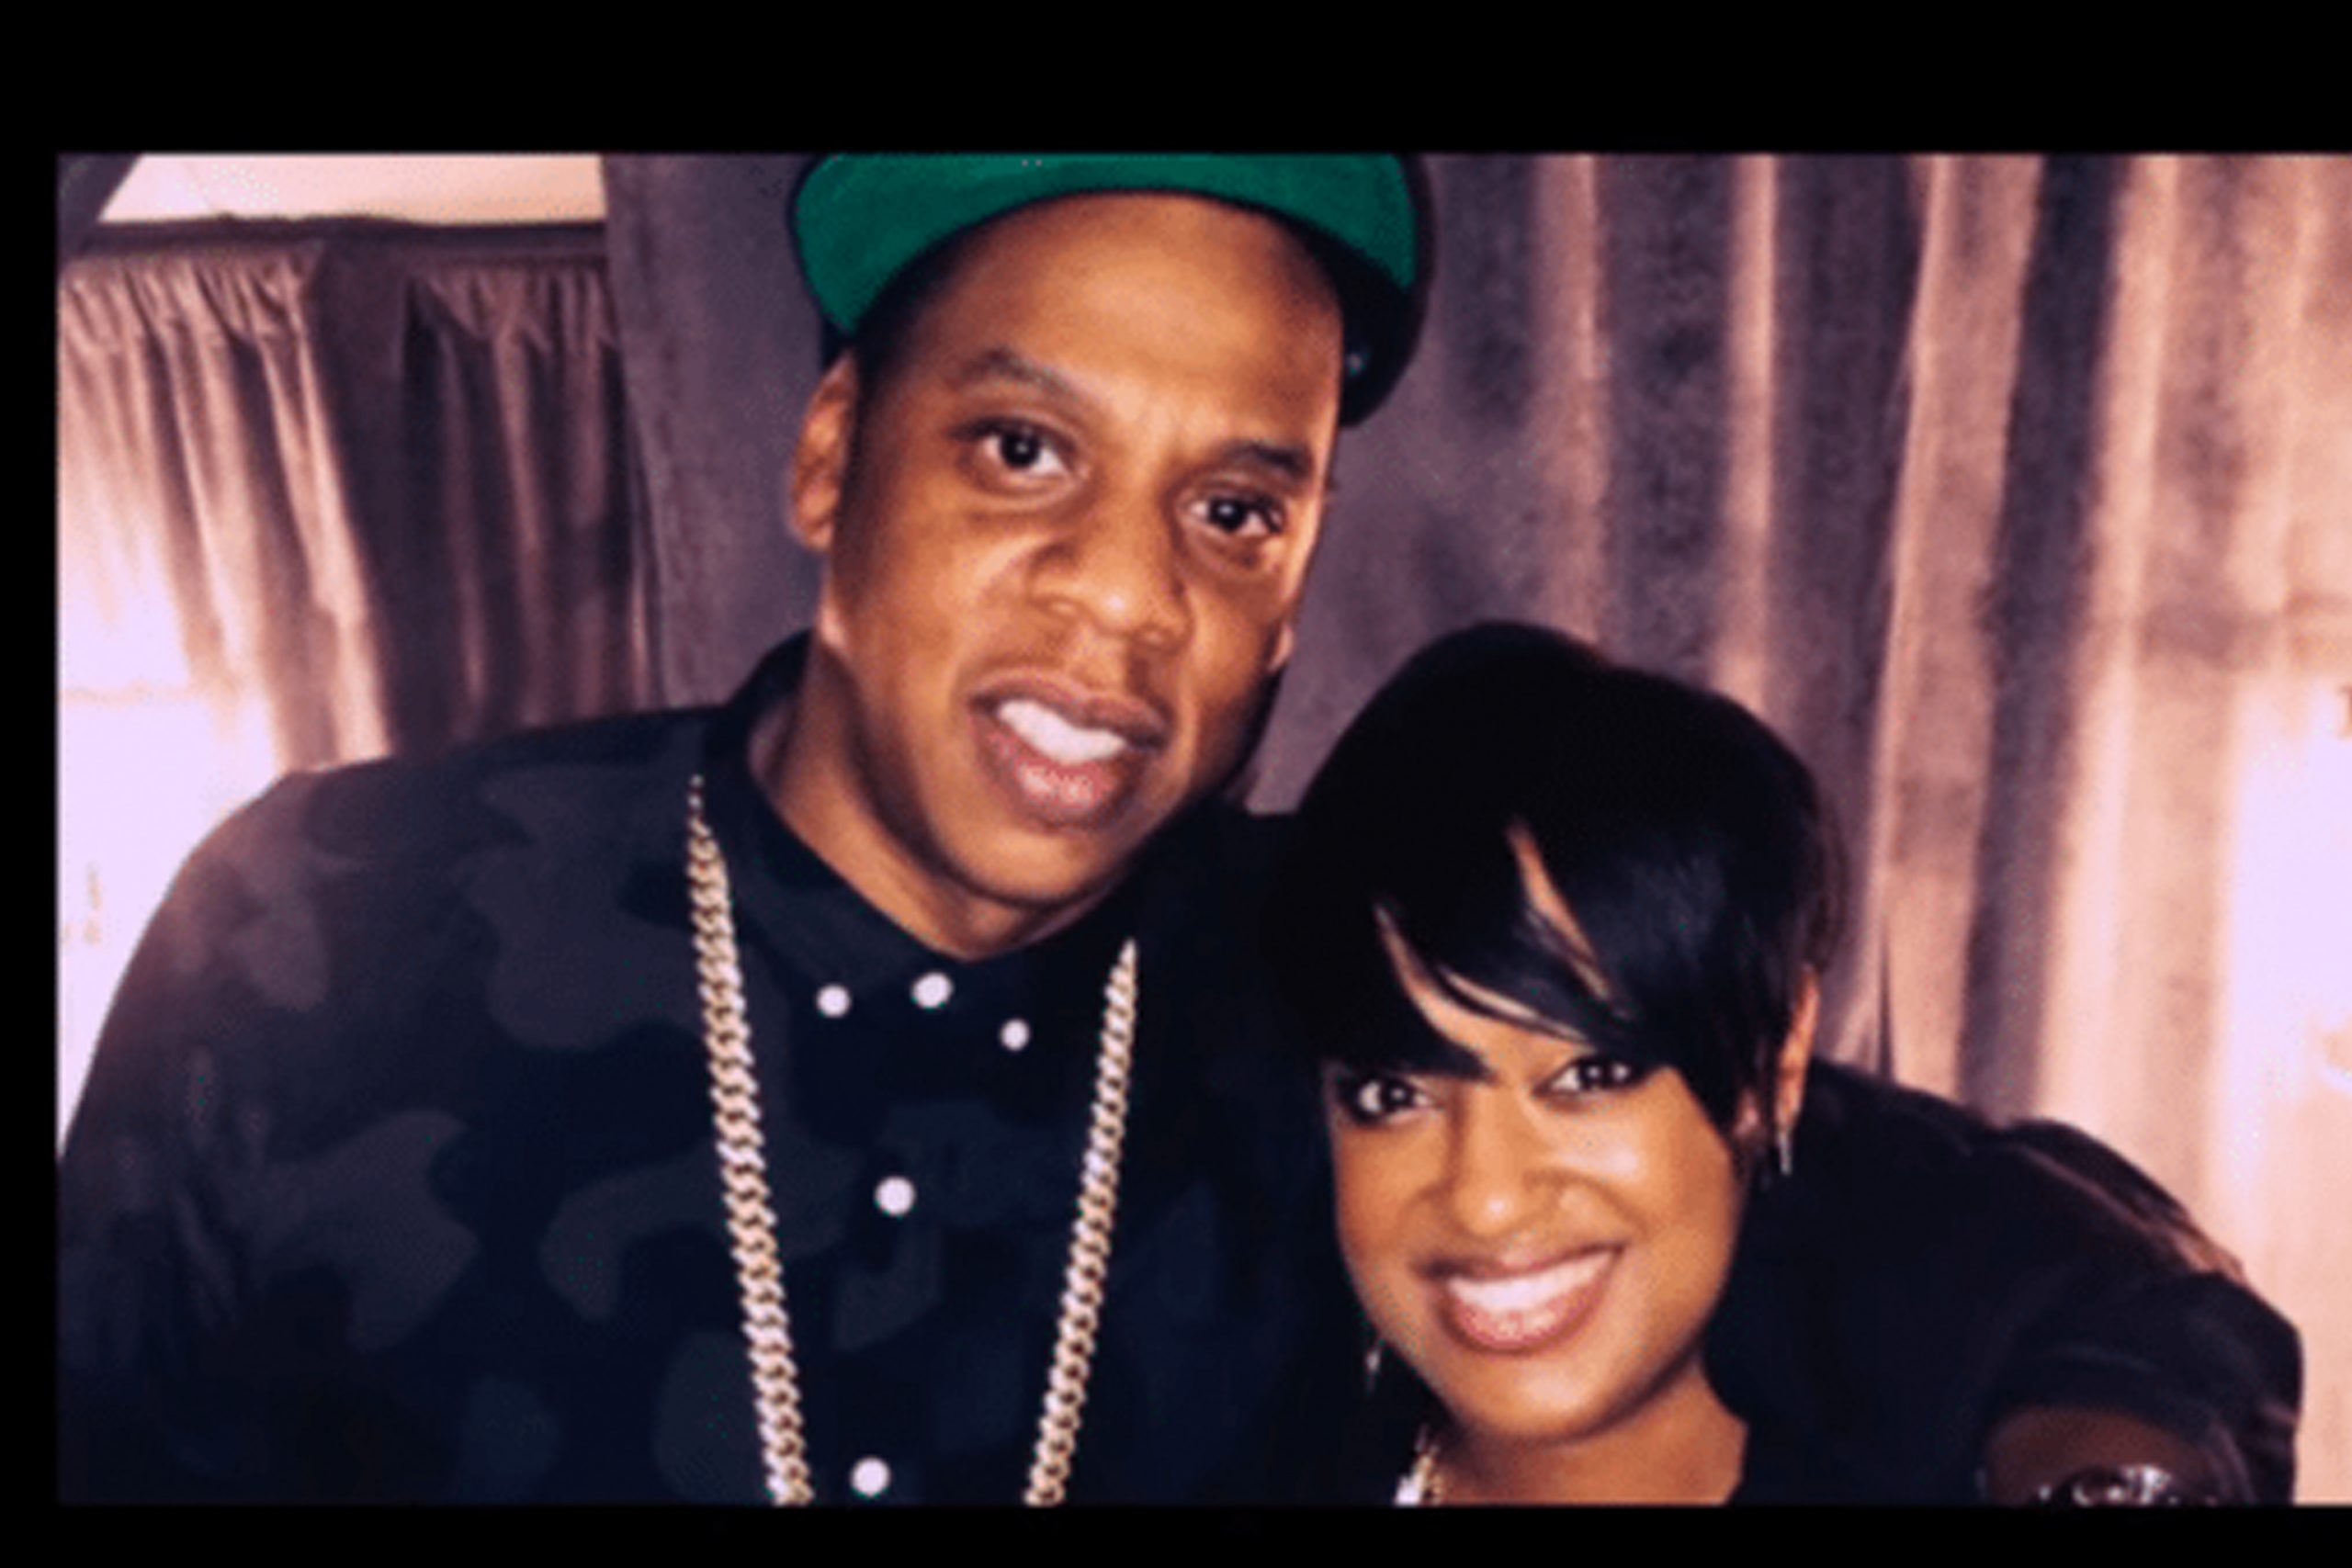 Jay-z and a woman